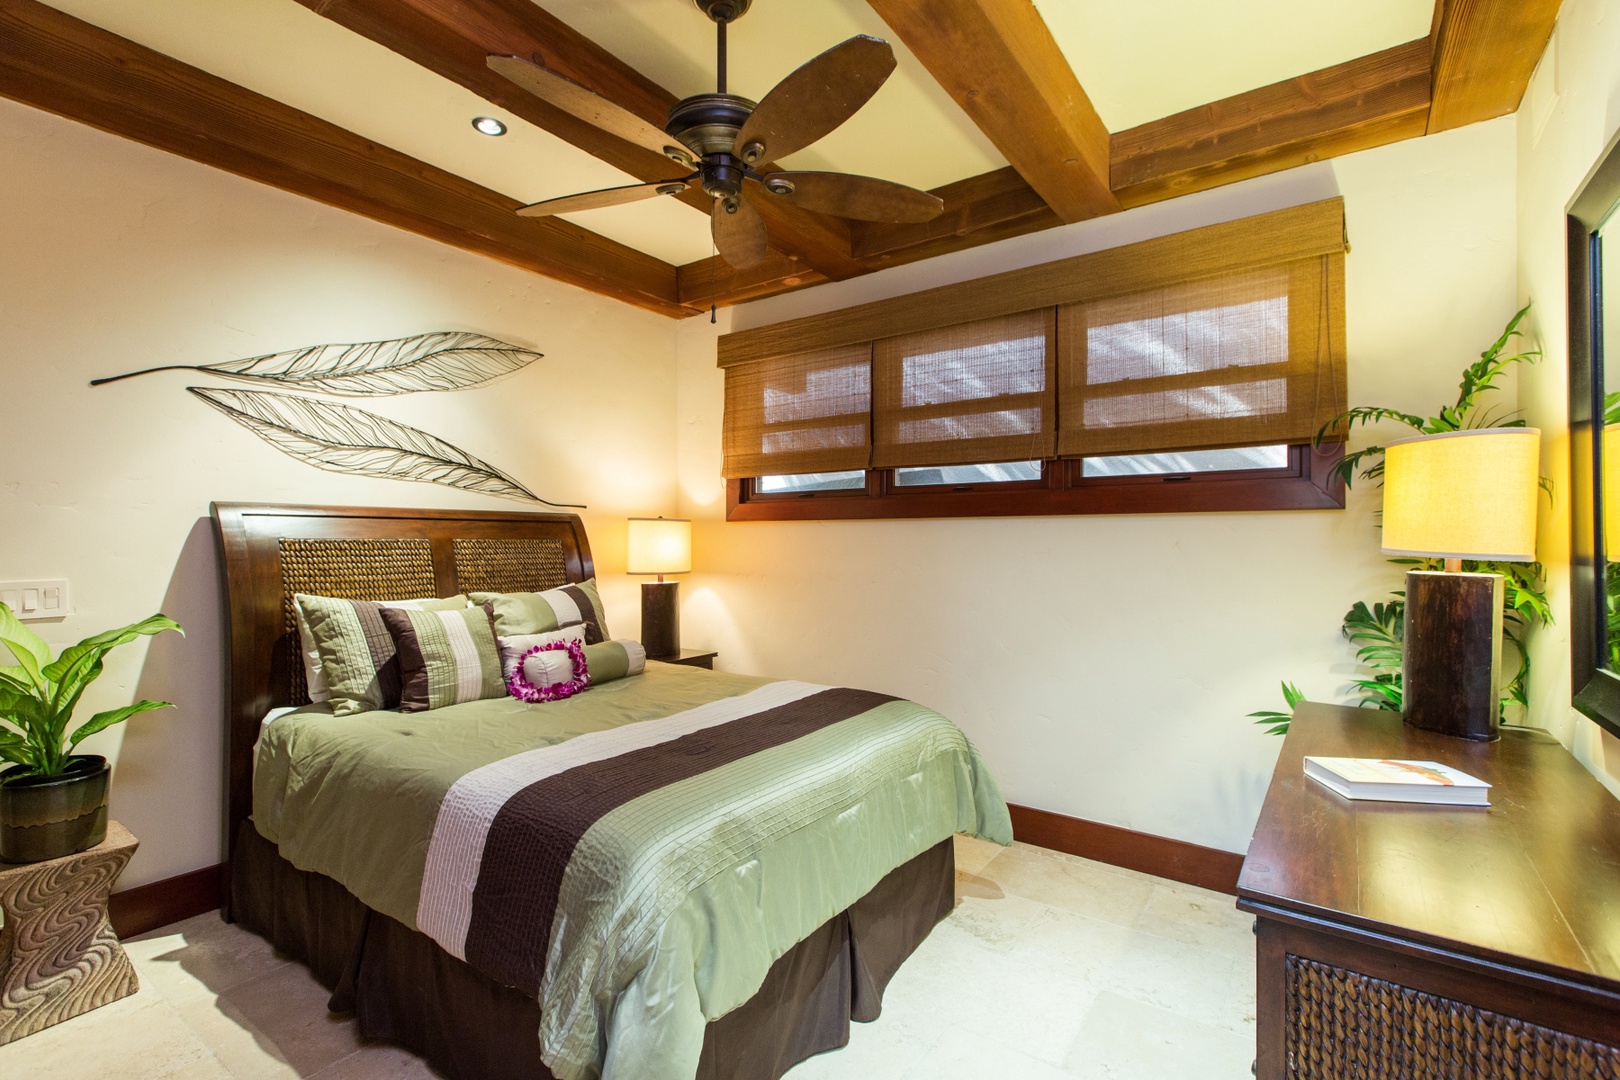 Honolulu Vacation Rentals, Banyan House - Guest Cottage Bedroom